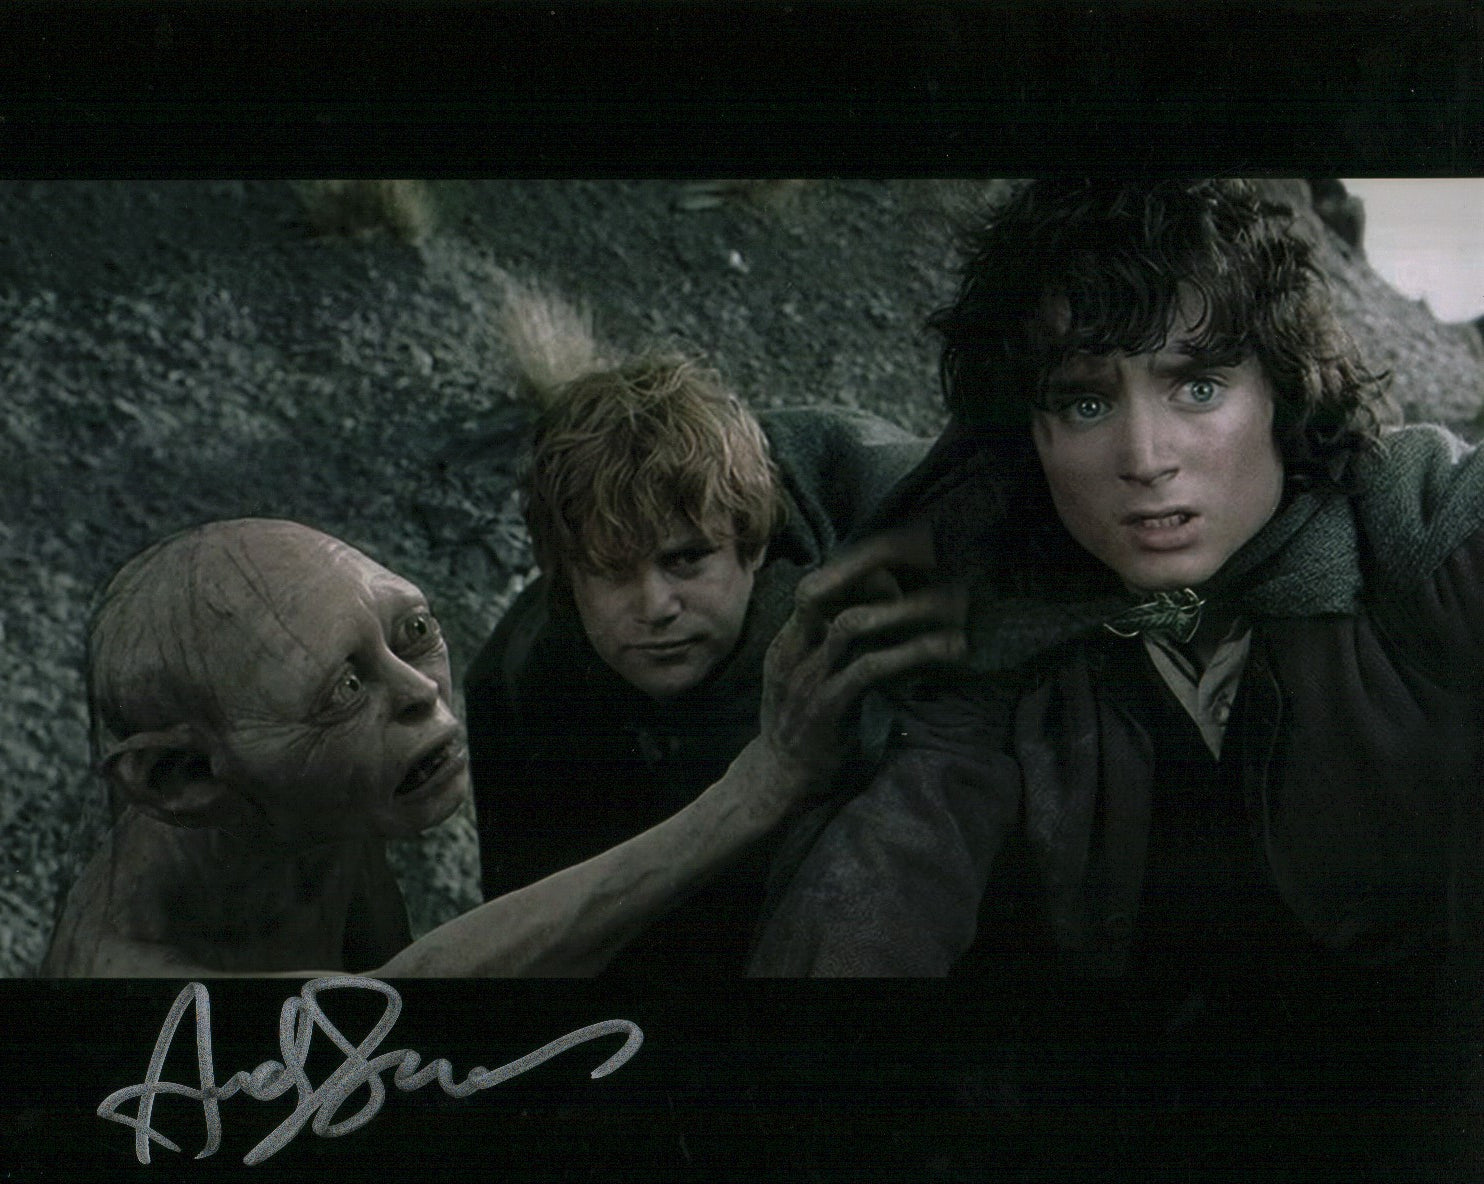 Andy Serkis Lord of the Rings 8x10 signed Photo JSA COA Certified Autograph GalaxyCon